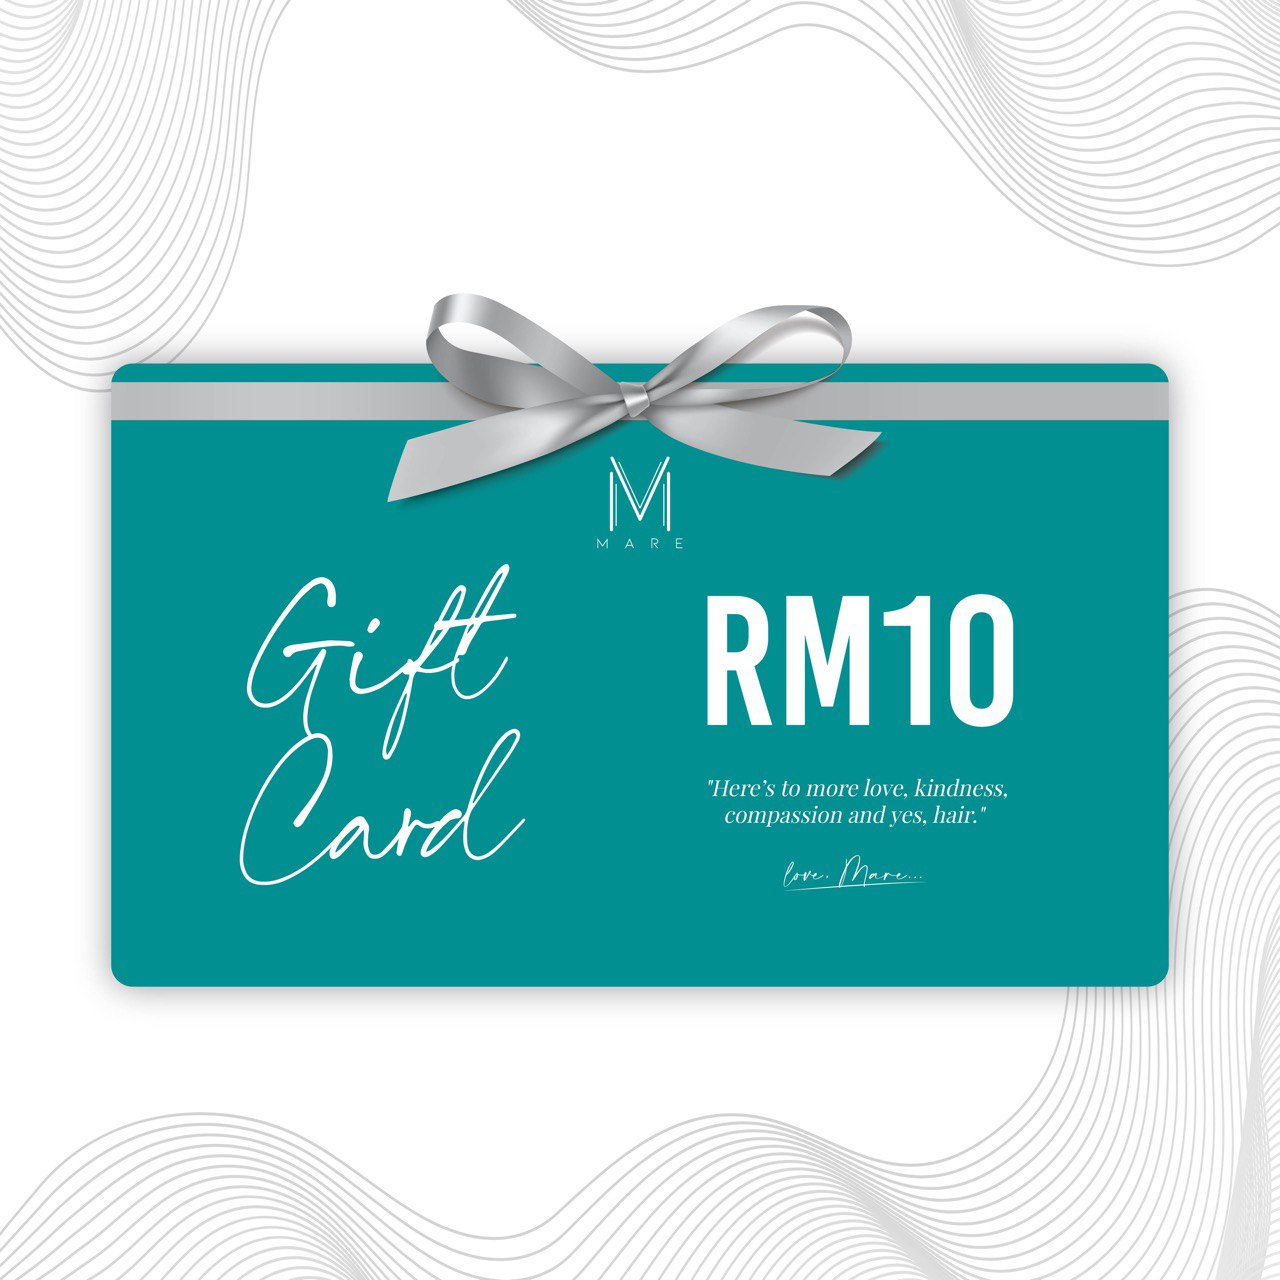 MARE Gift Card RM10